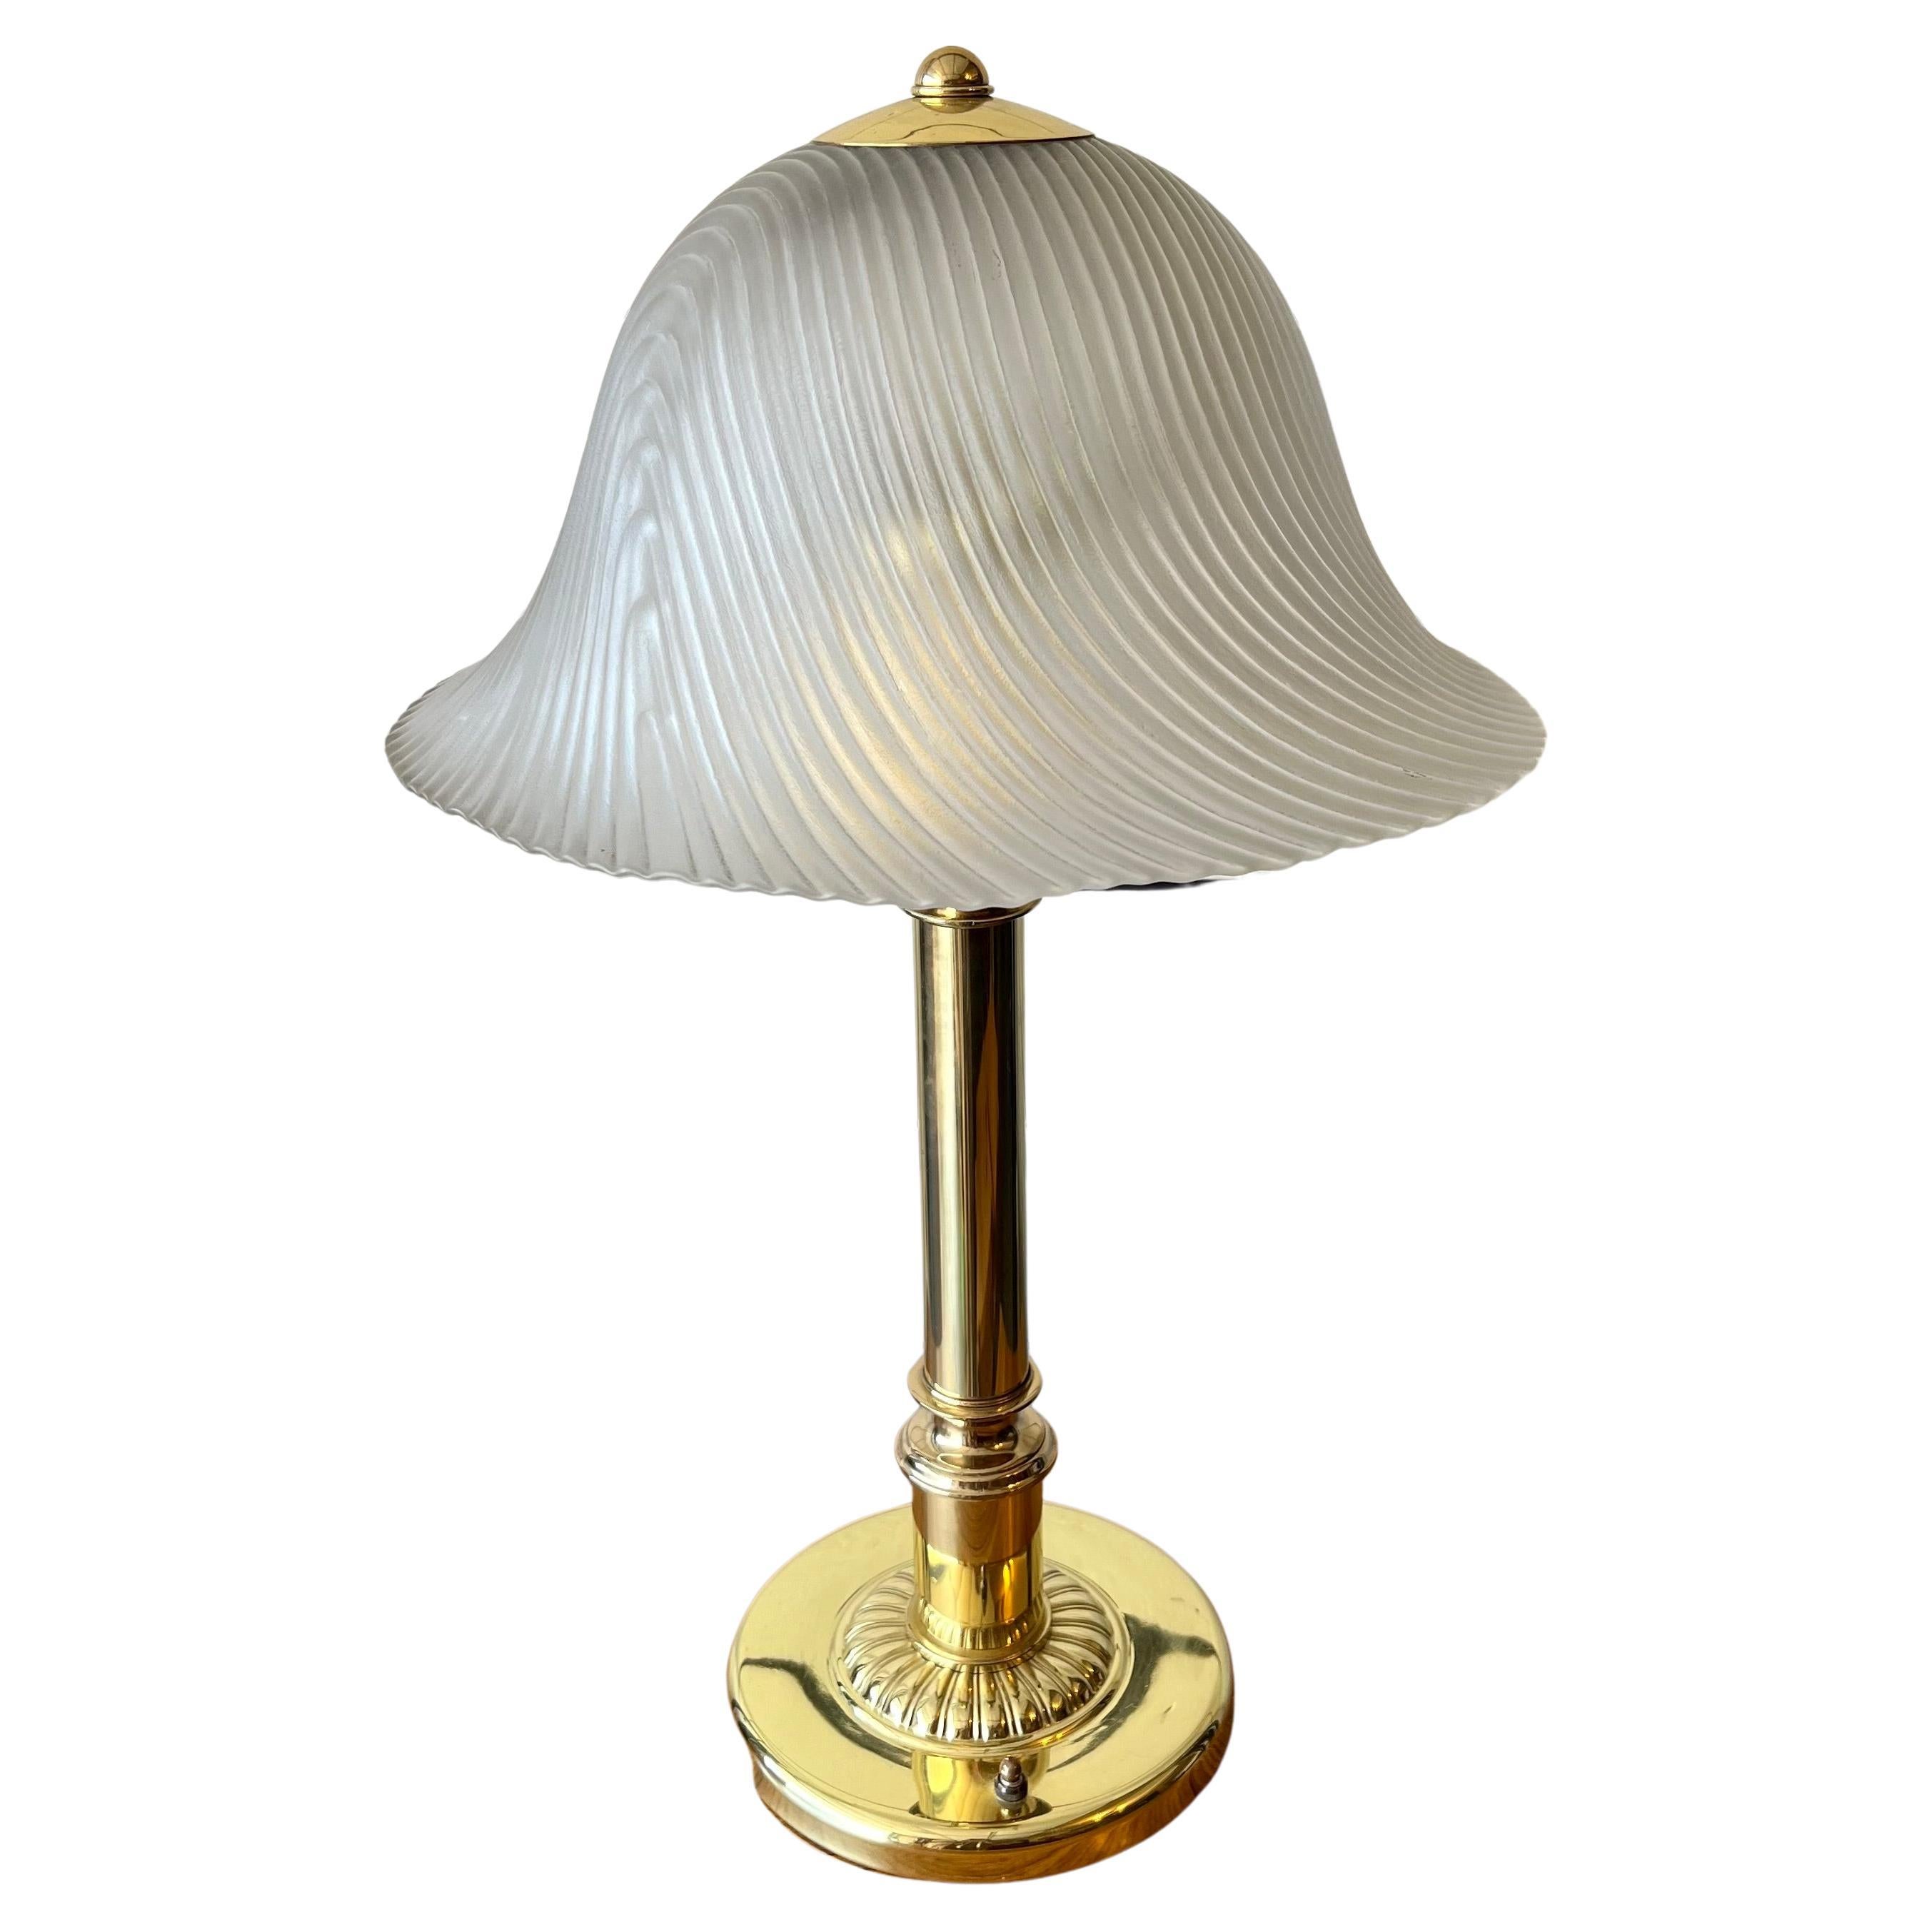 Vintage Art Deco Hollywood Regency Table Lamp with Ribbed Frosted Glass Shade